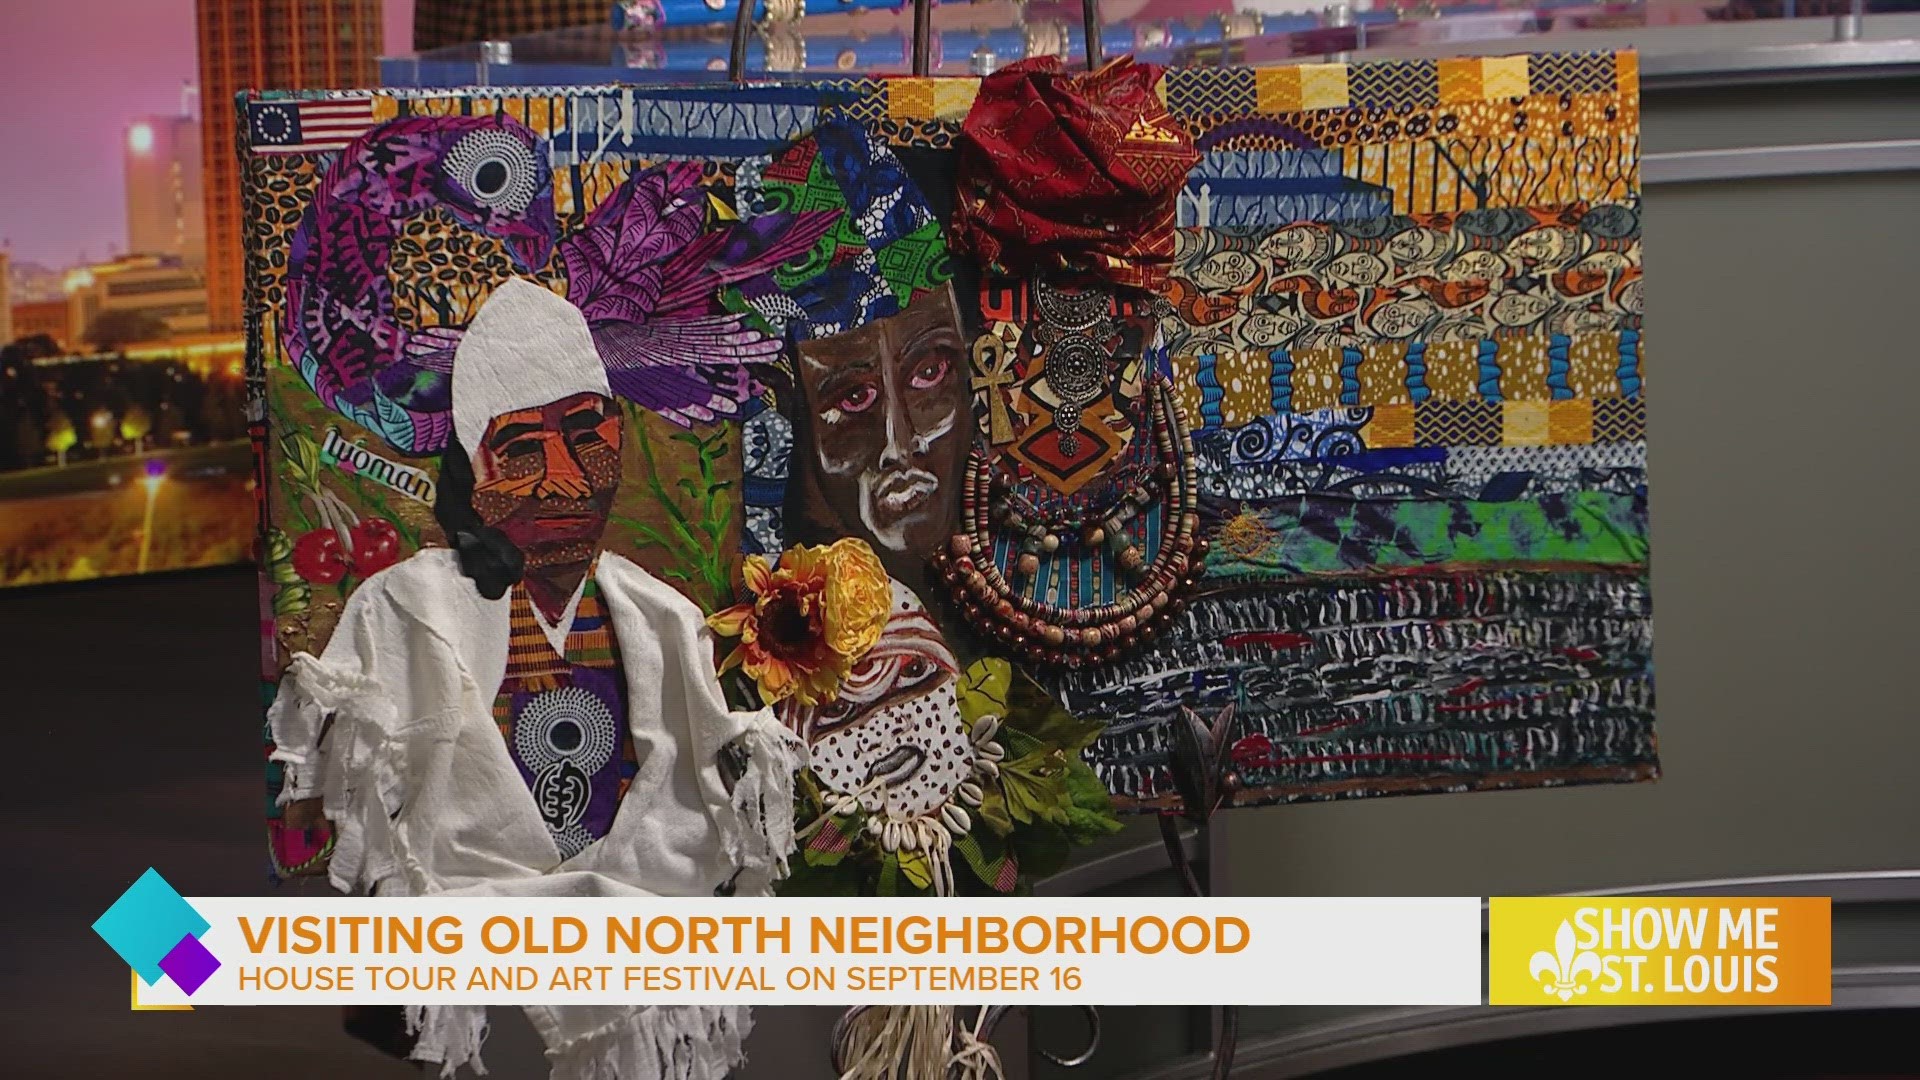 The House Tour and Community Arts Festival in Old North St. Louis is this Saturday, Sept. 16.